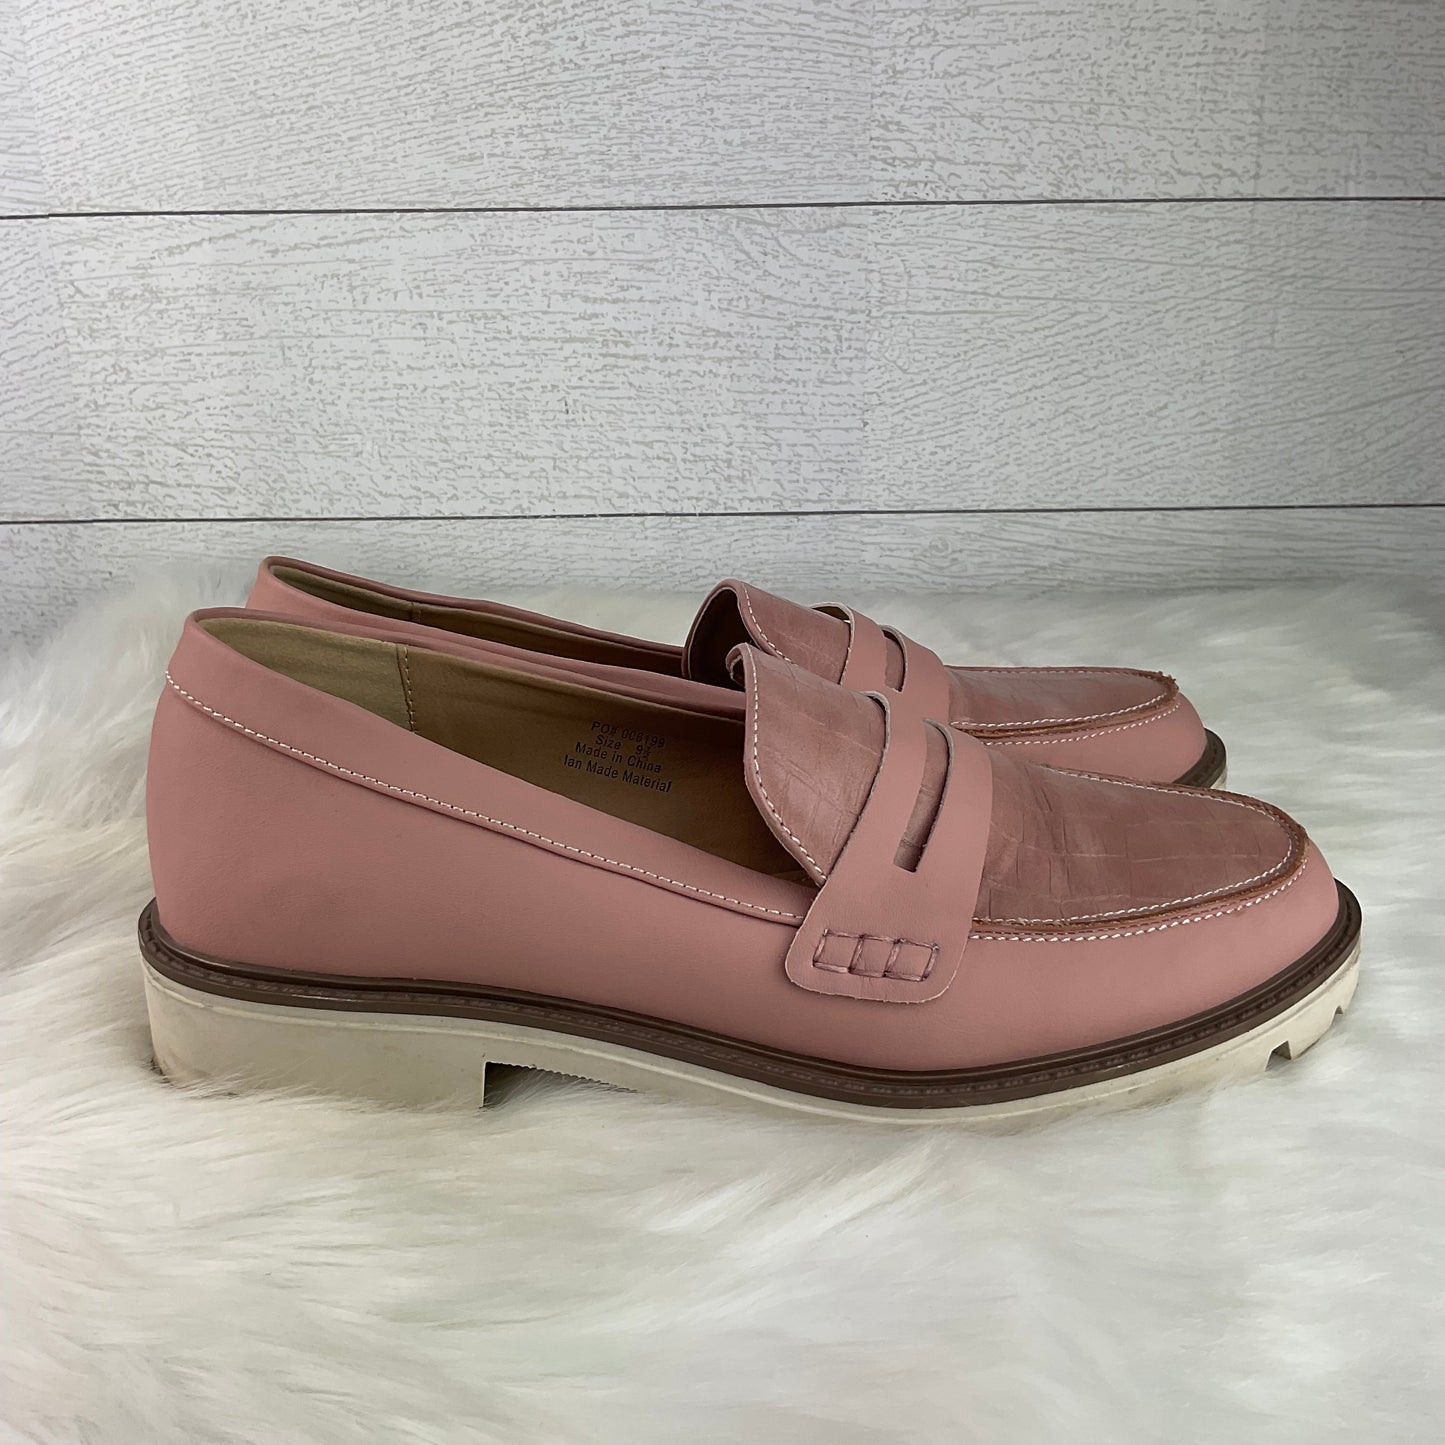 Pink Shoes Flats Journee, Size 9.5